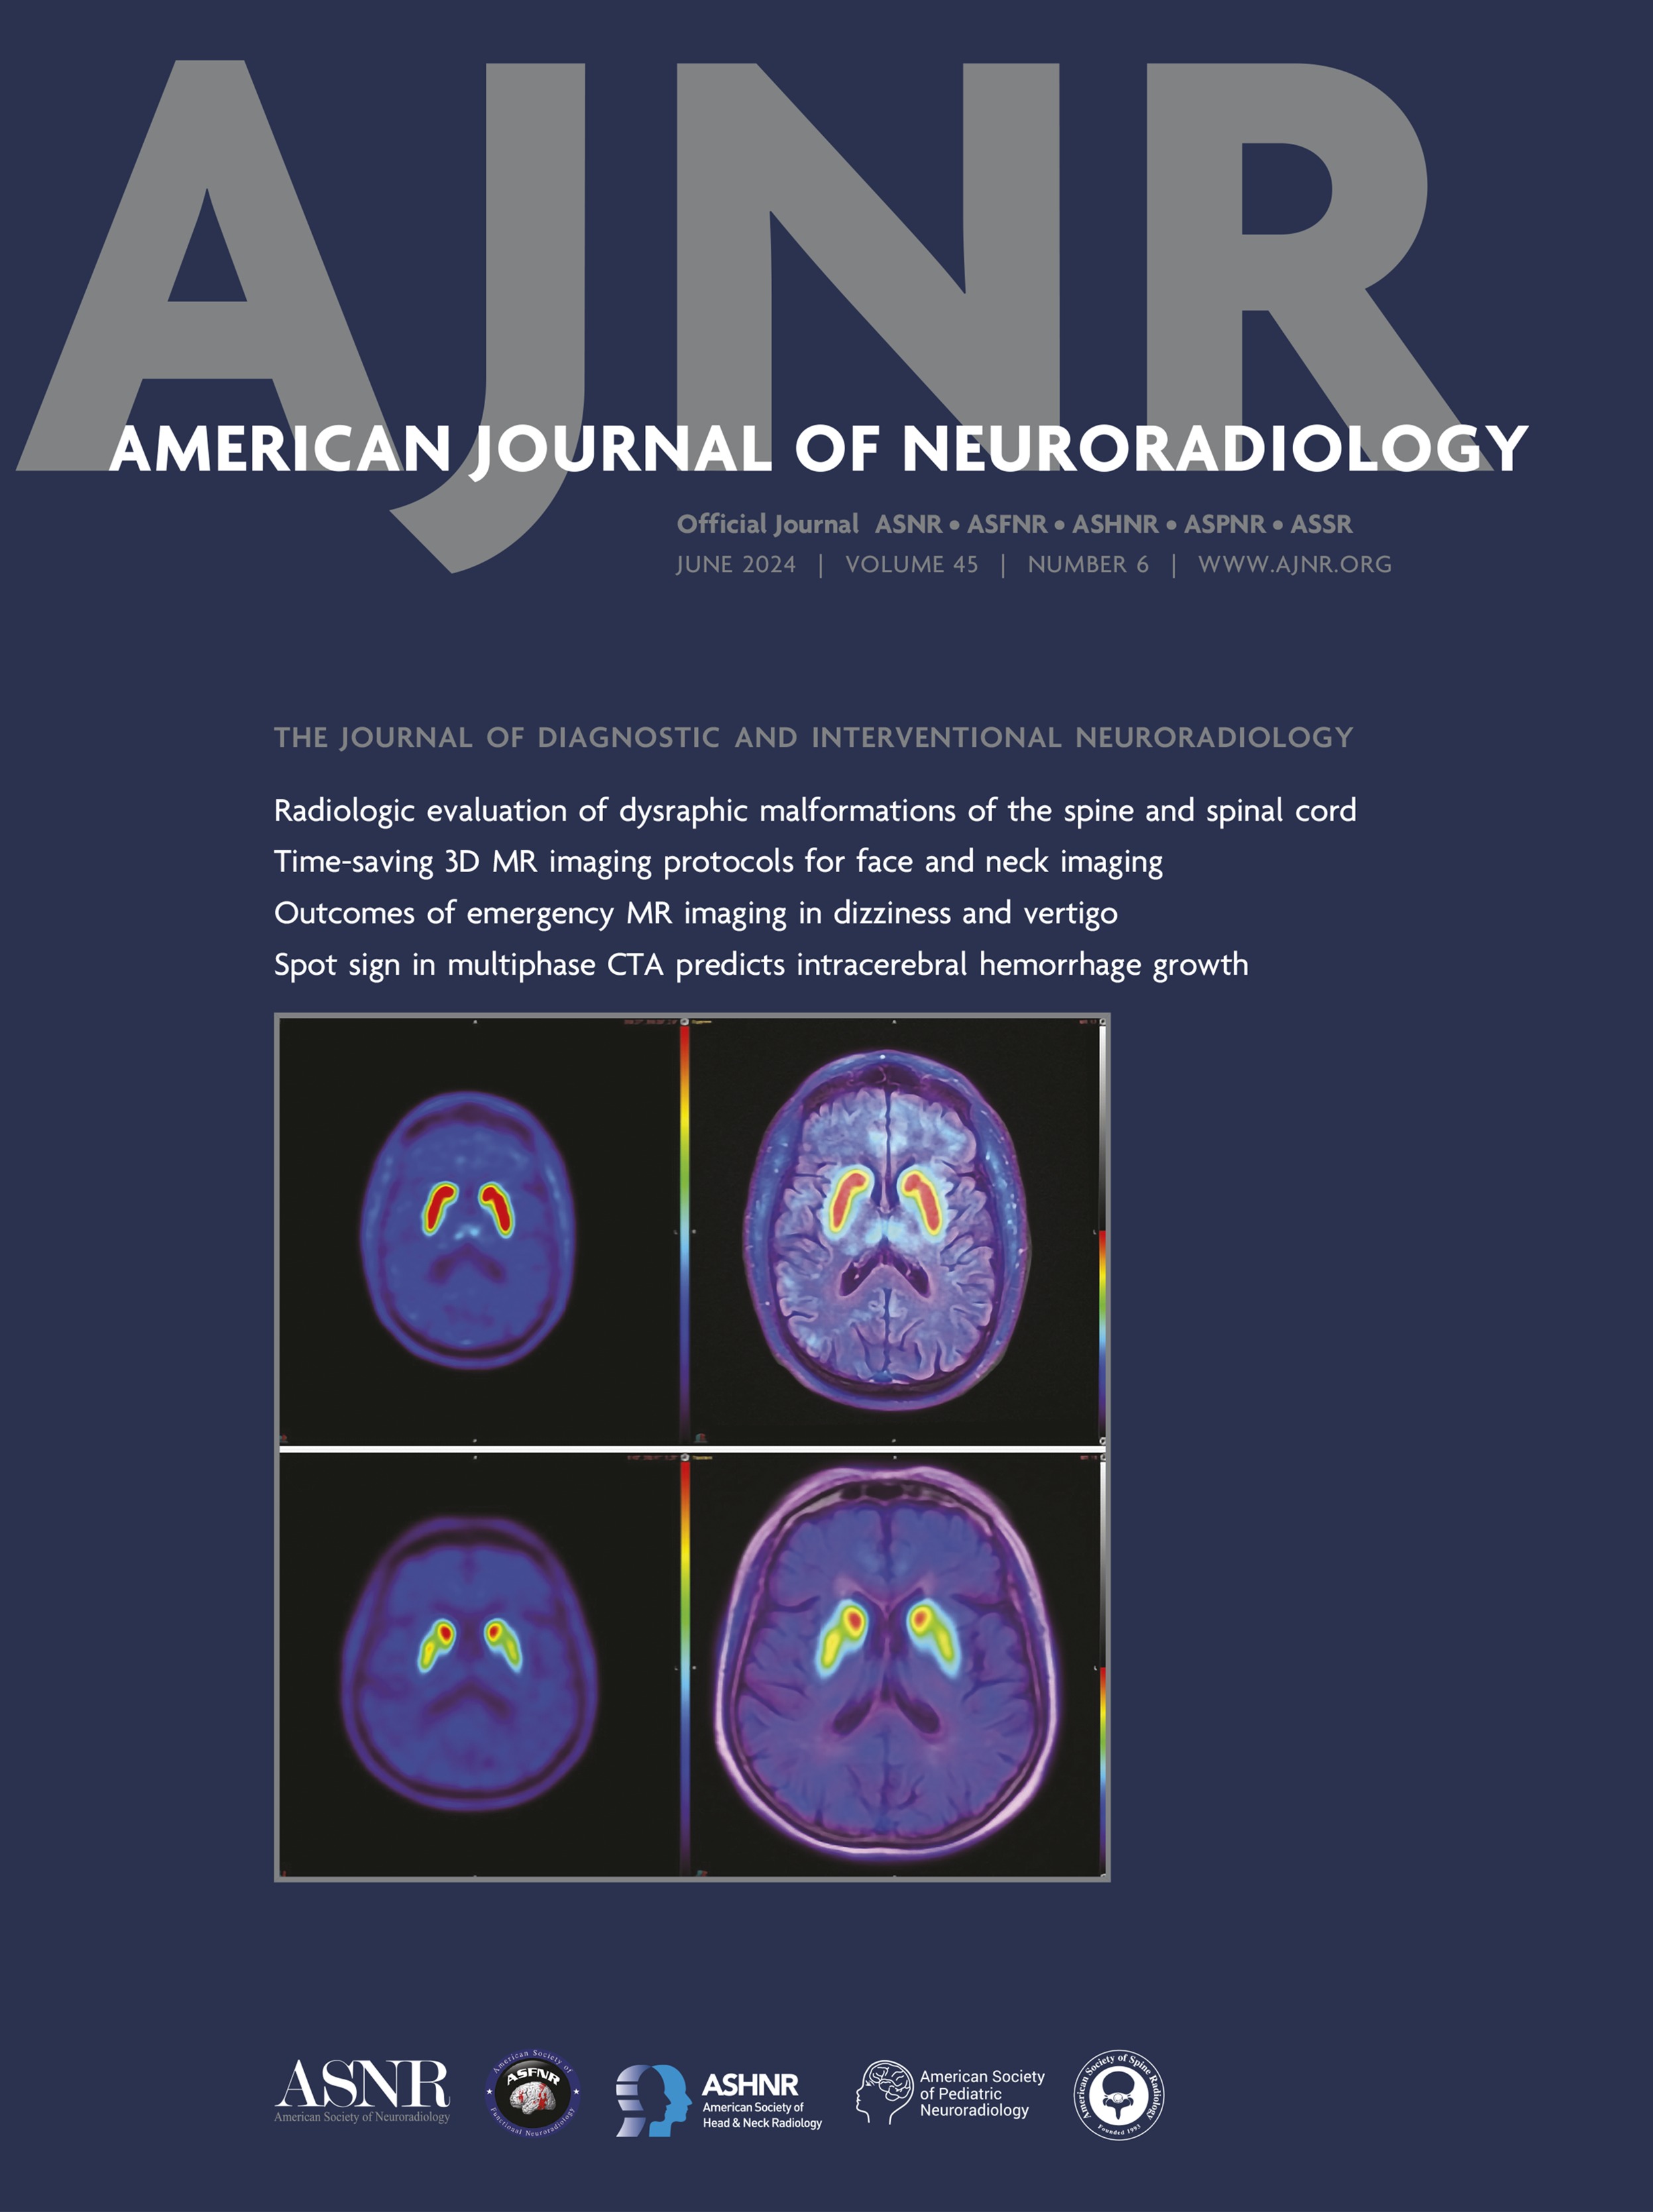 The Clinical Value of Cranial CT Venography for Predicting Fusobacterium necrophorum as the Causative Agent in Children with Complicated Acute Mastoiditis [PEDIATRIC NEUROIMAGING]